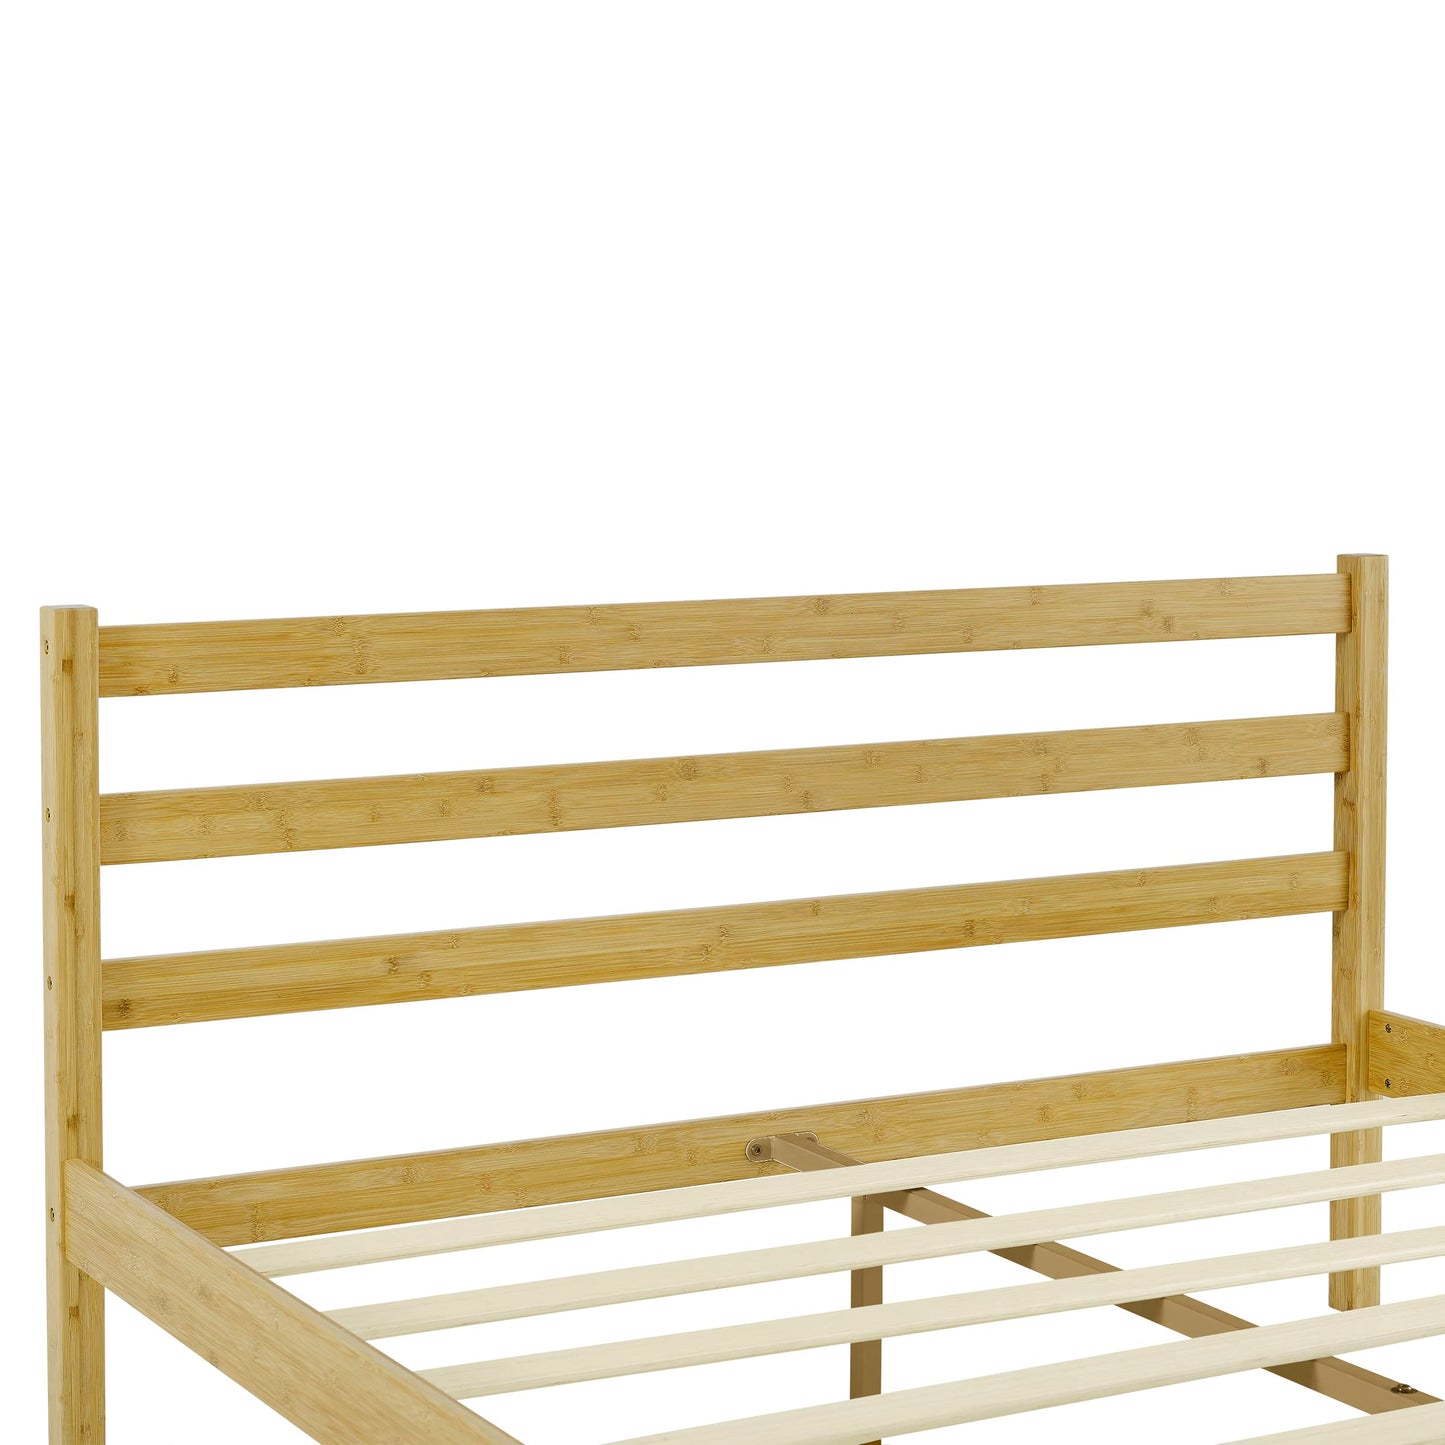 MUSEHOMEINC Classic Bamboo Queen Platform Bed Frame with Headboard for Bedroom, Strong Wood Slat Support, No Box Spring Needed, Easy Assembly, Natural (Queen)